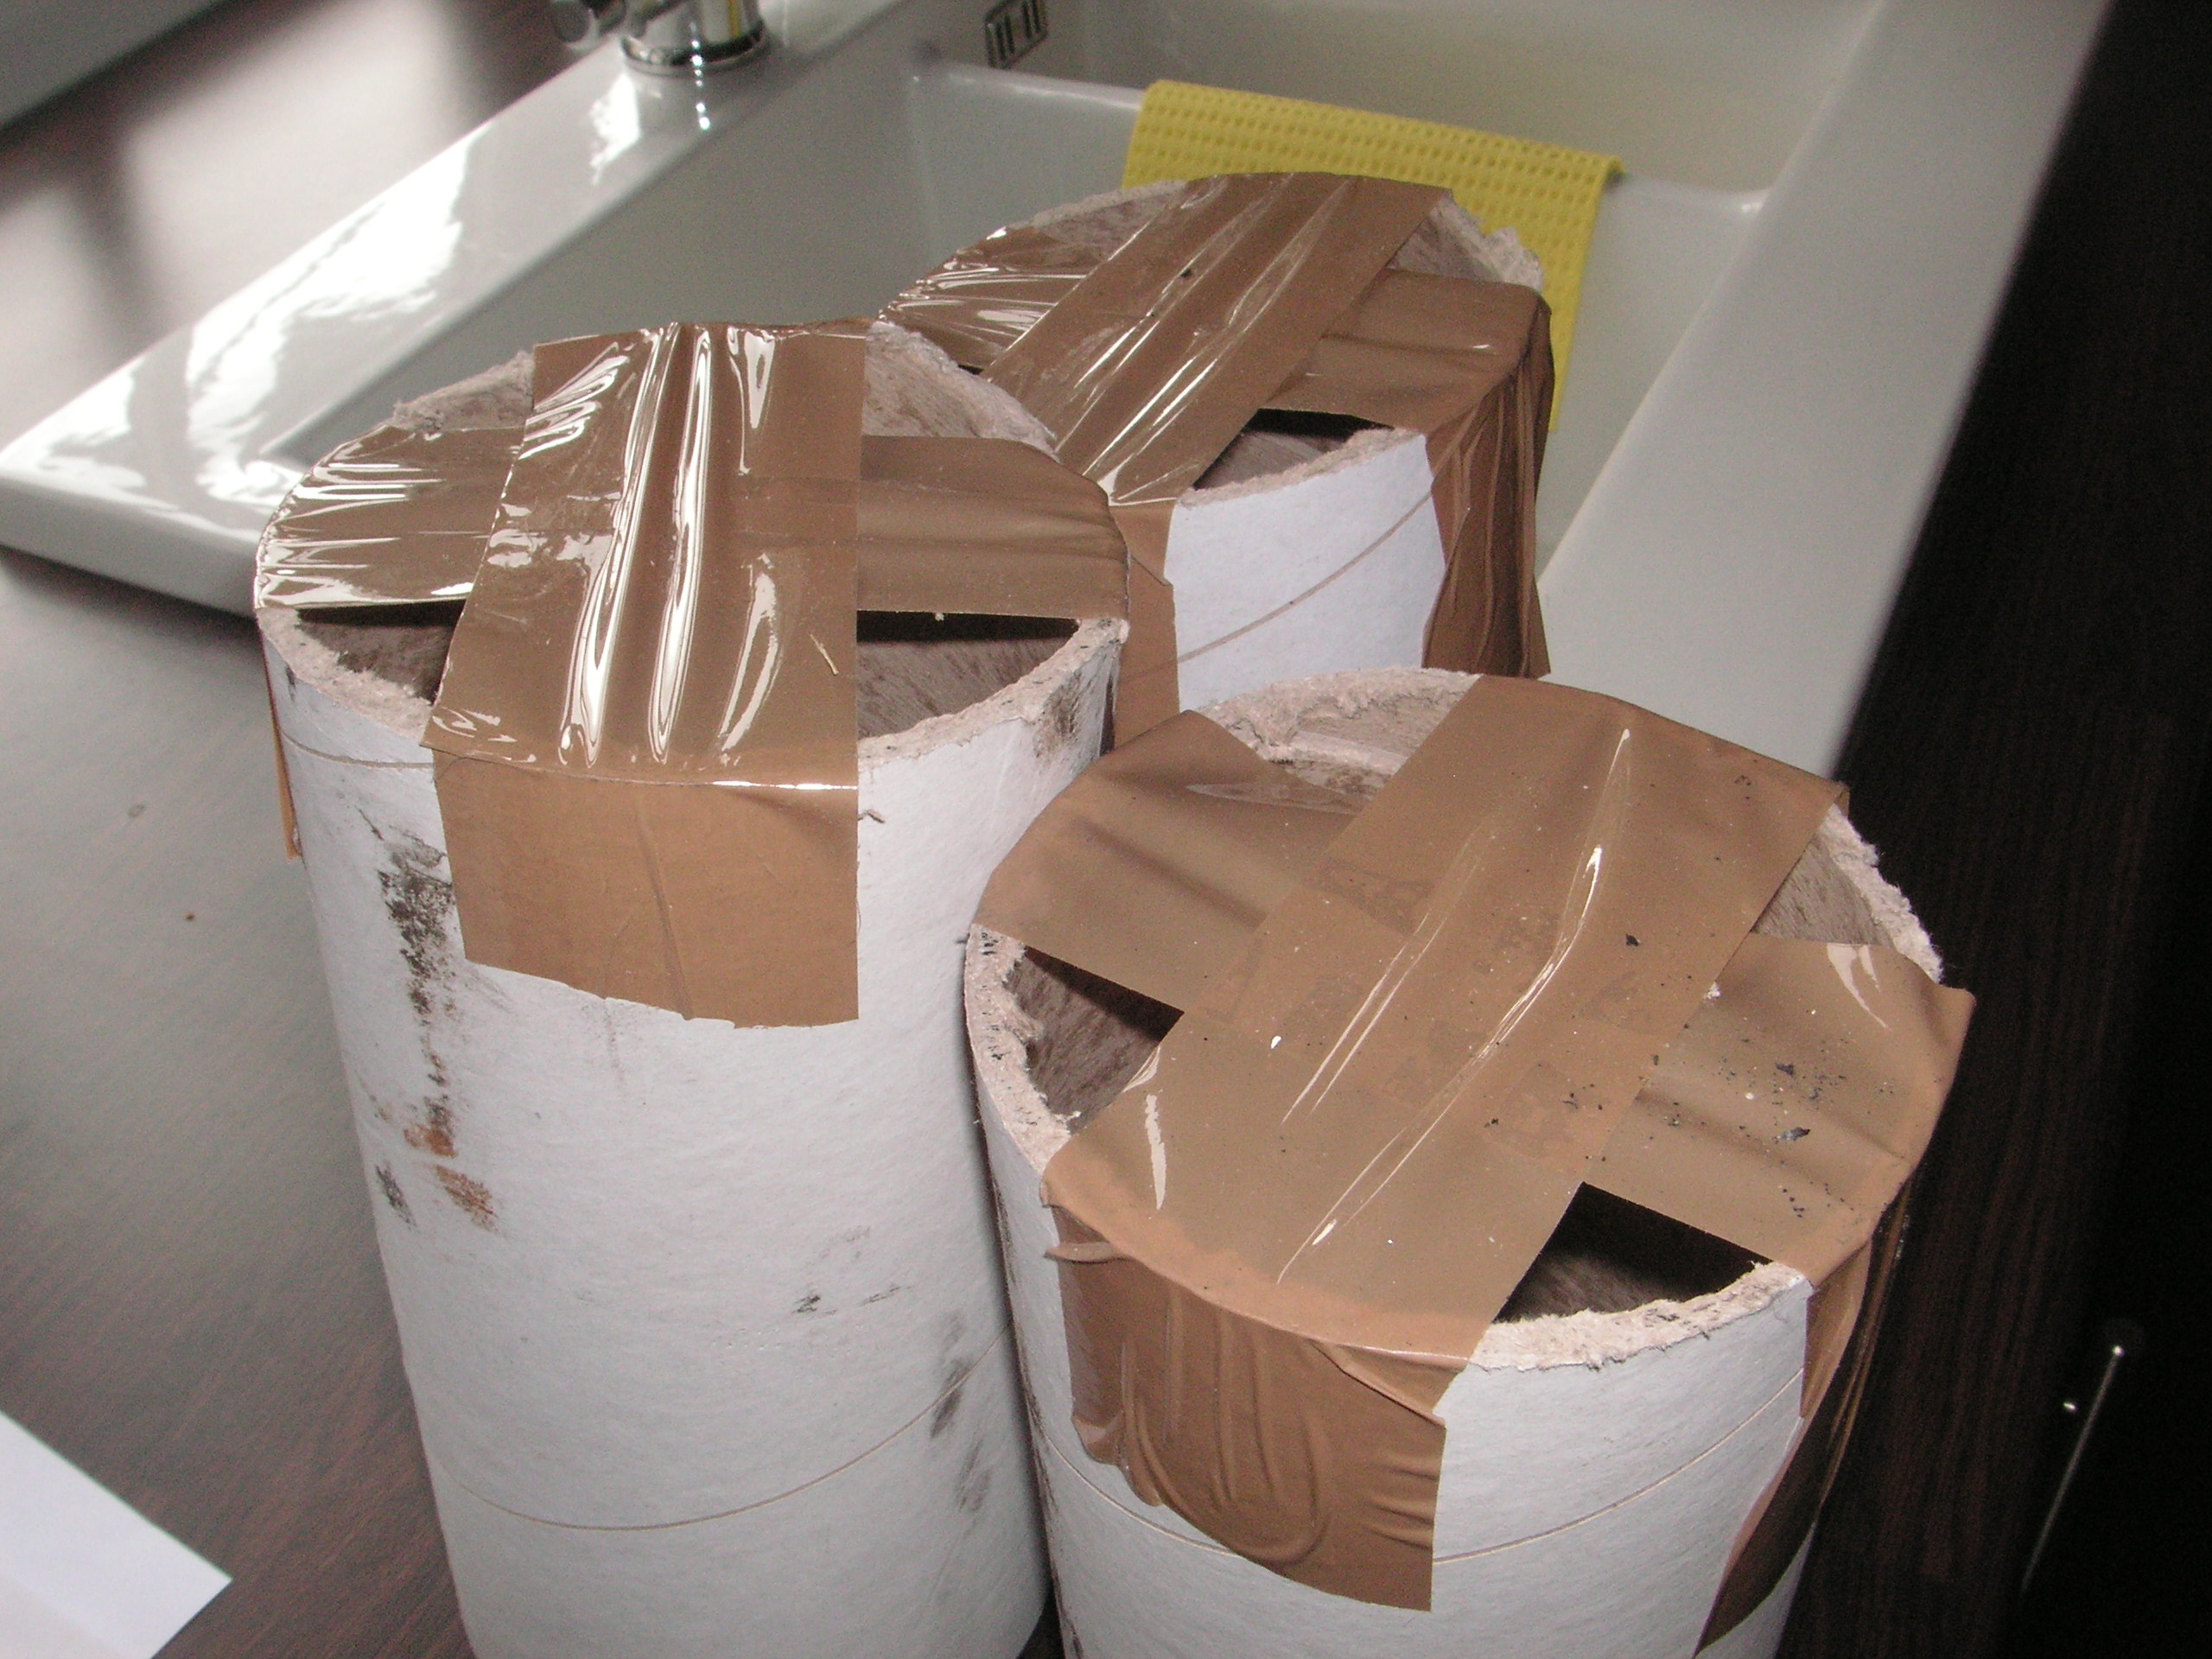 Cut lengths of carpet tube with one end sealed with packing tape